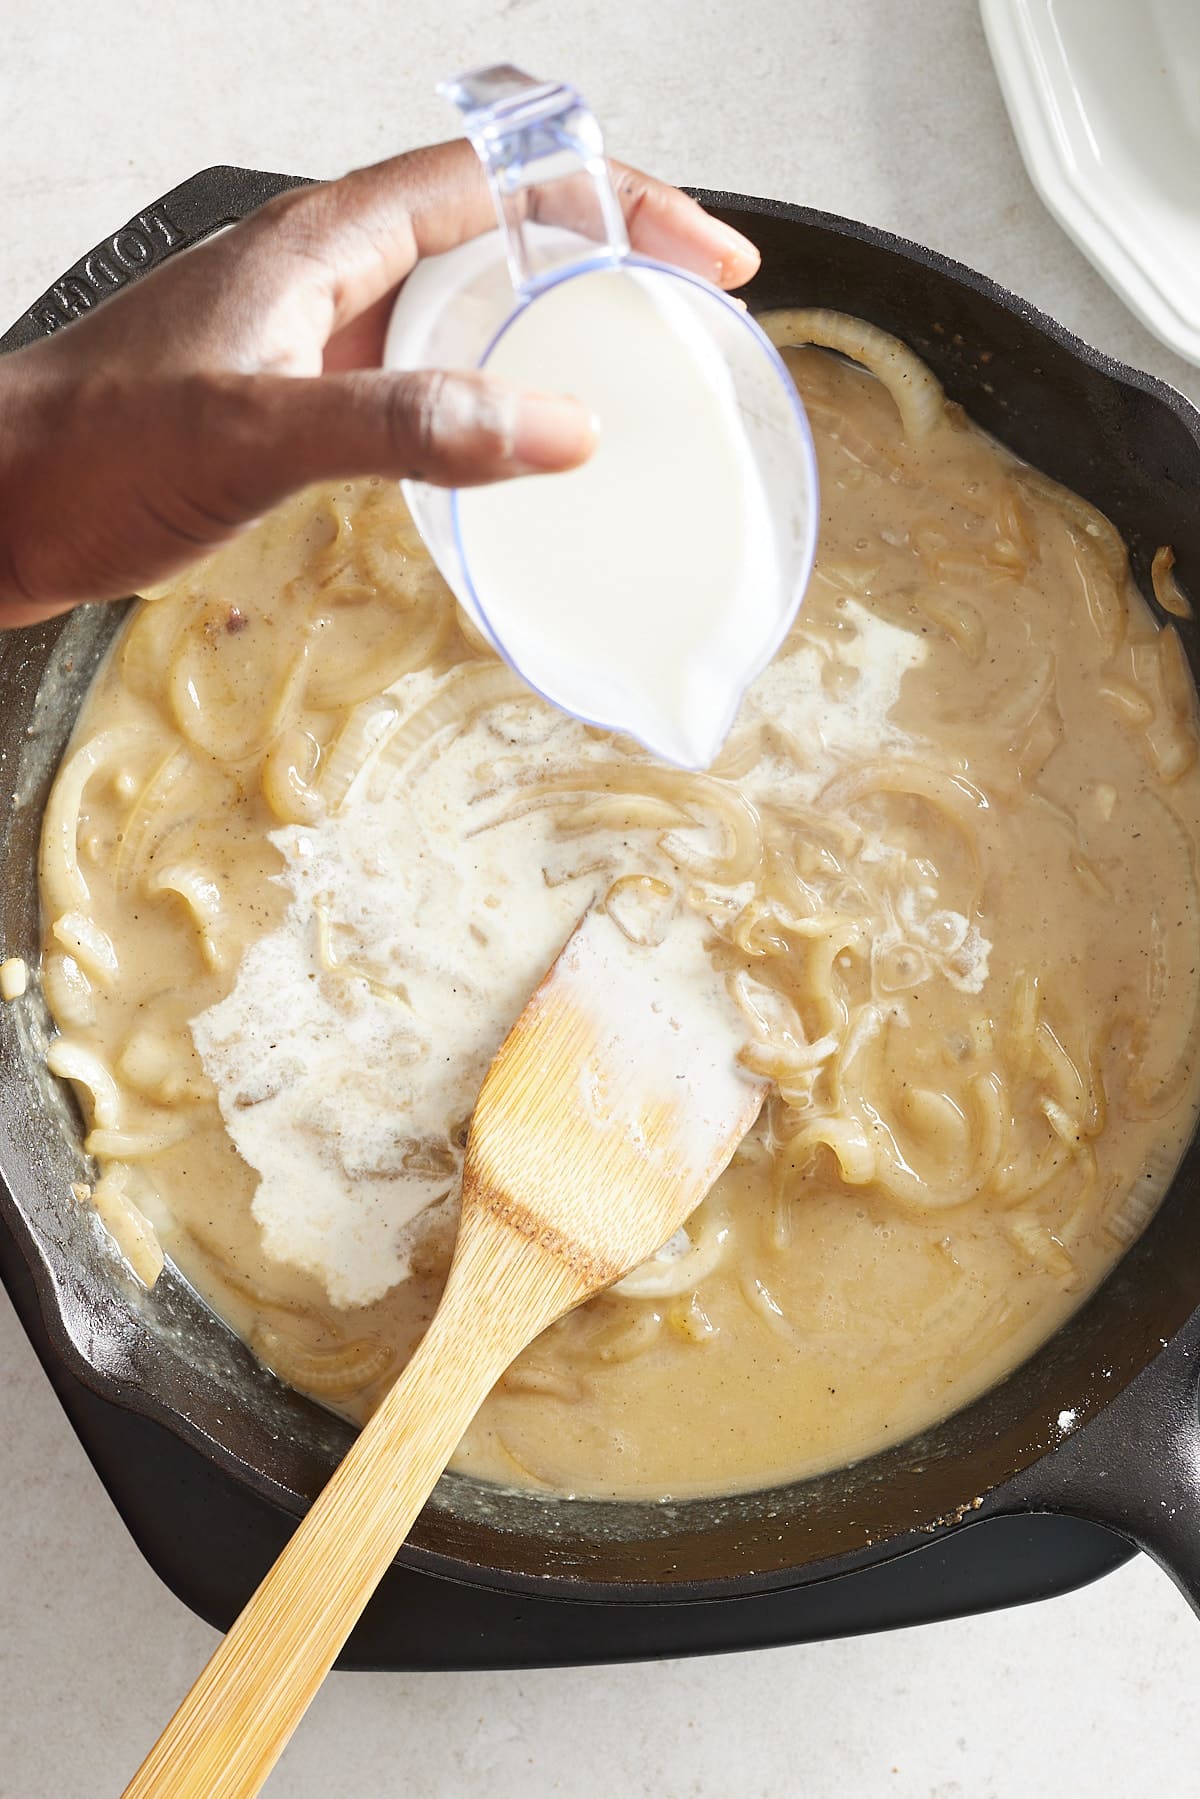 cream being added to the gravy in a cast iron pan